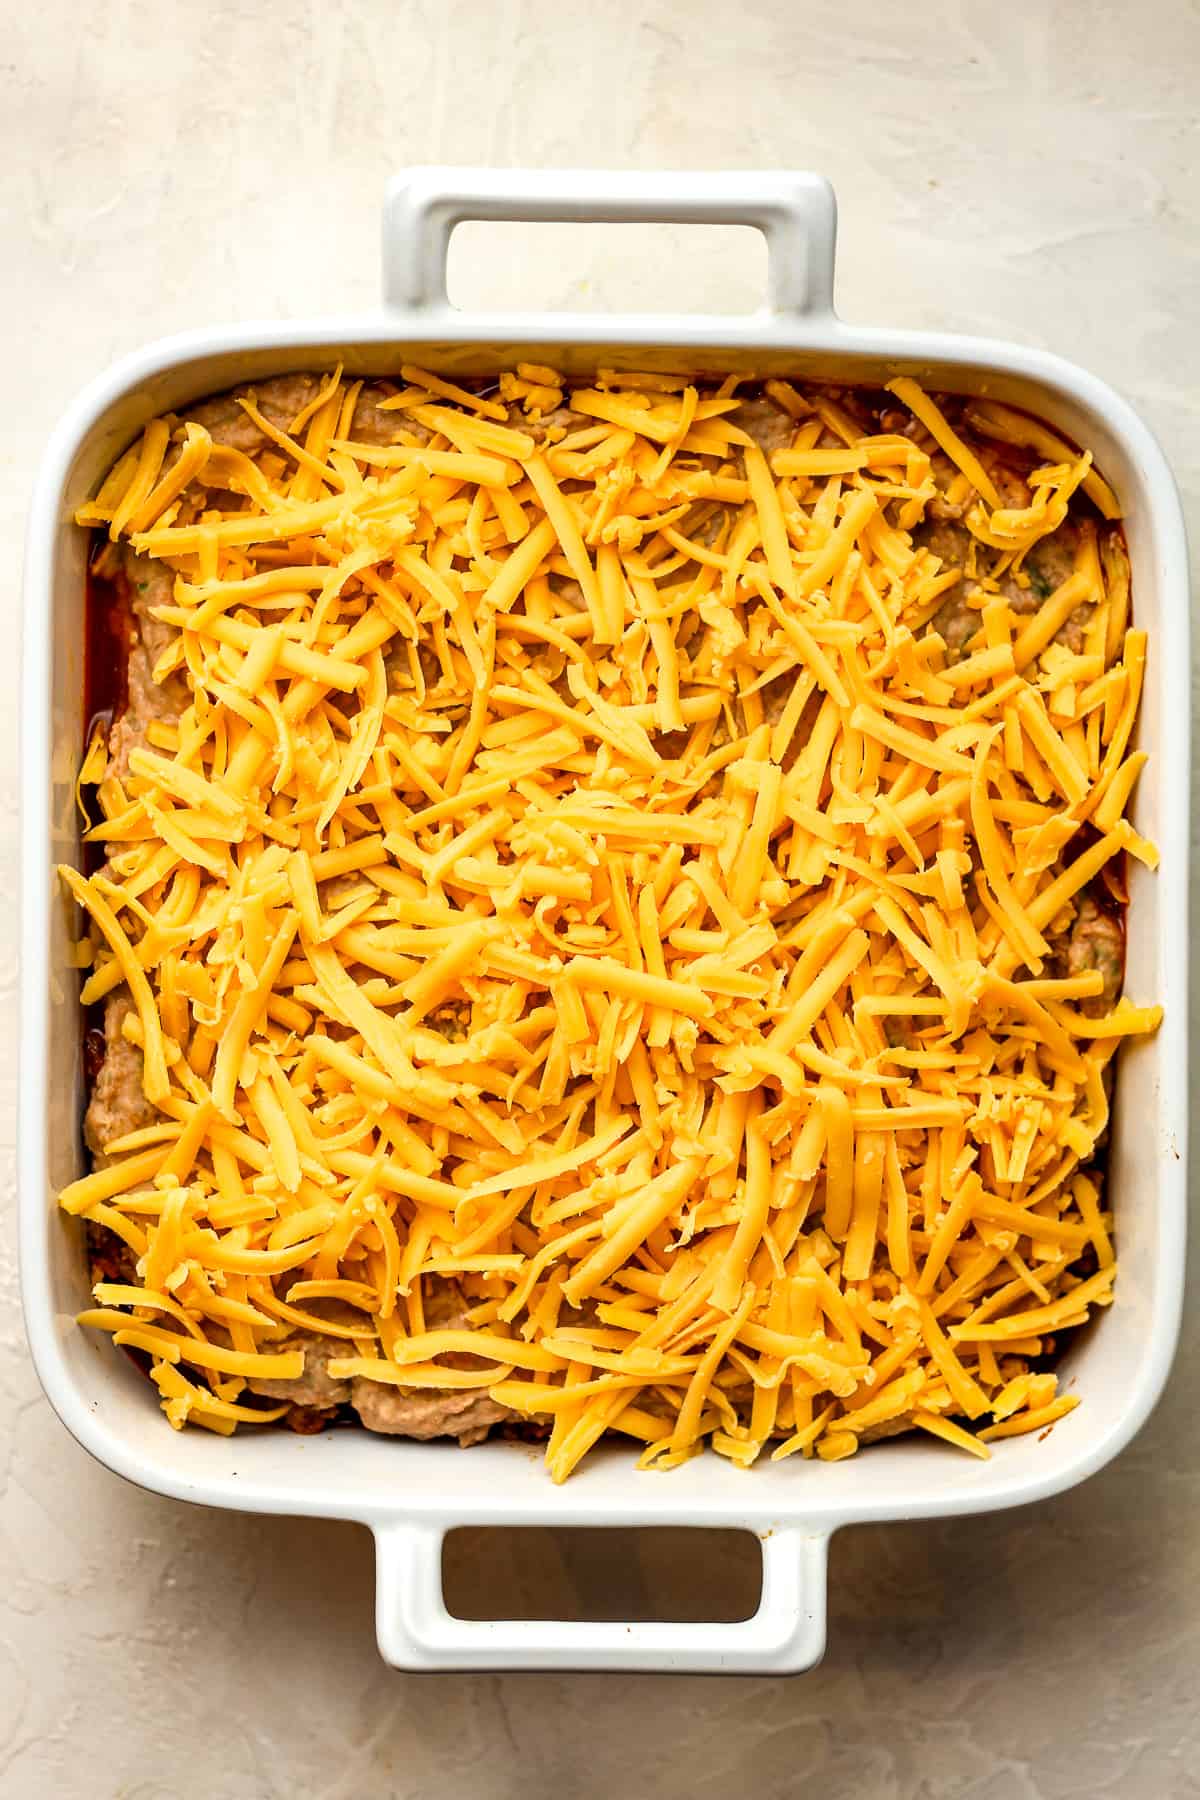 A dish of the casserole with shredded cheese.